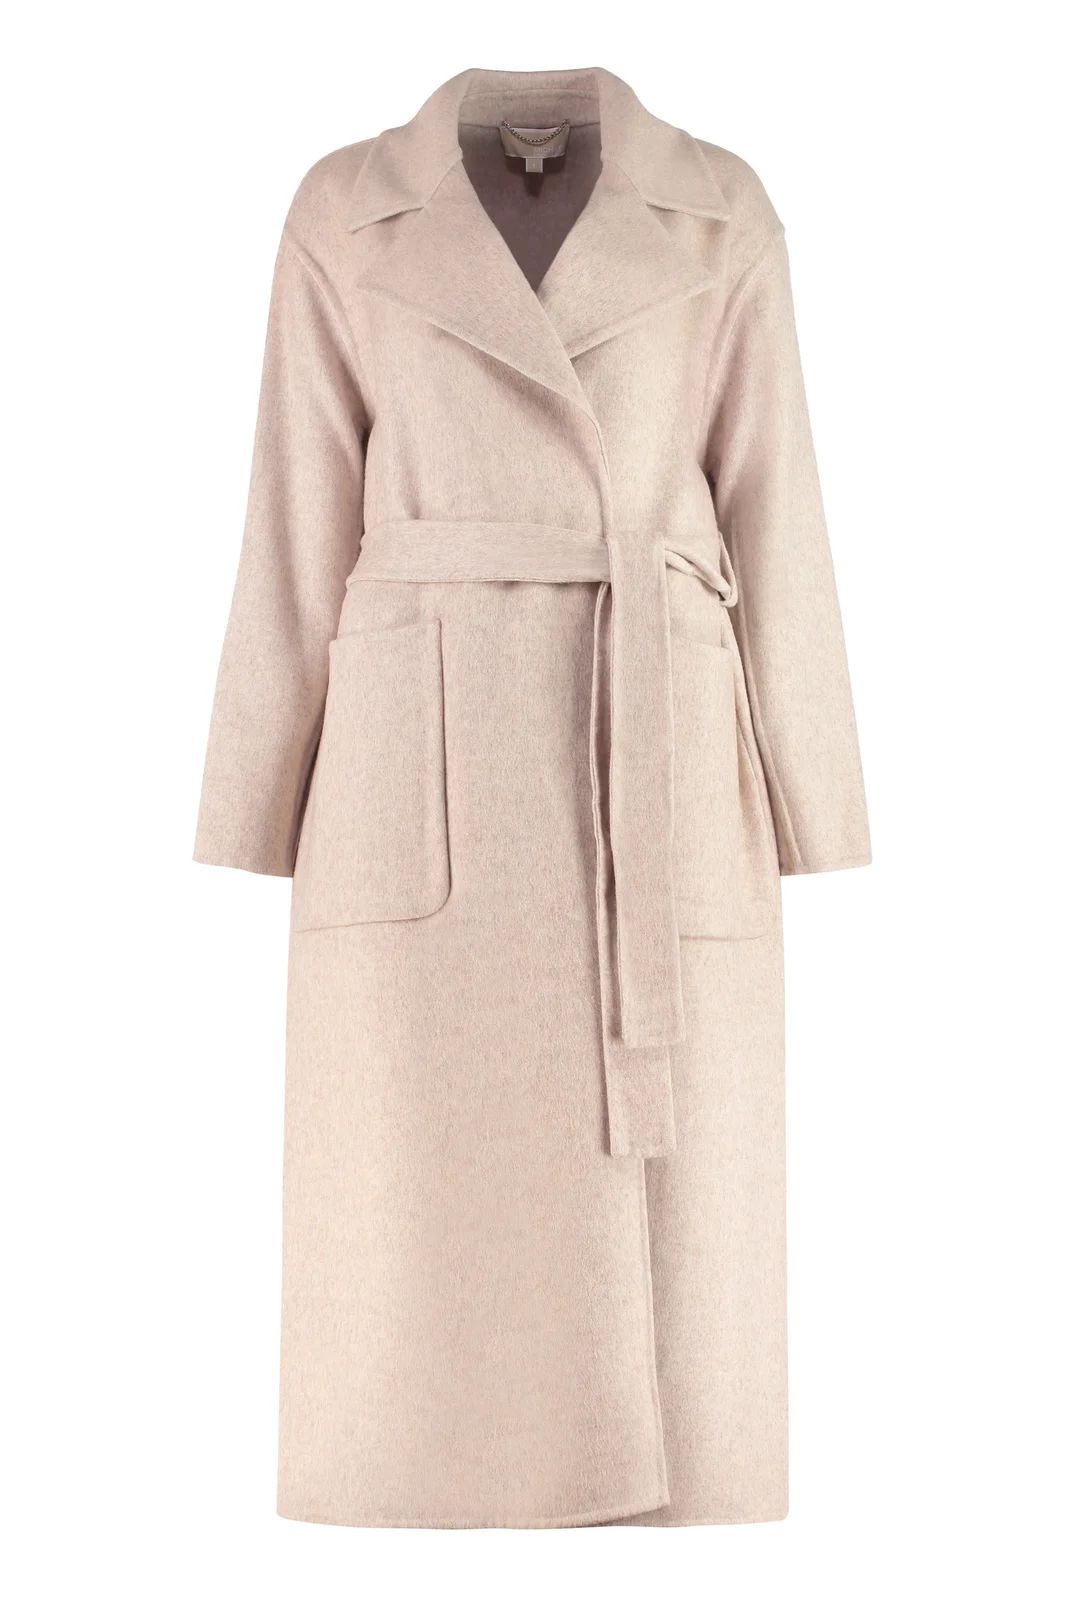 Michael Michael Kors Double-Breasted Tailored Coat | Cettire Global